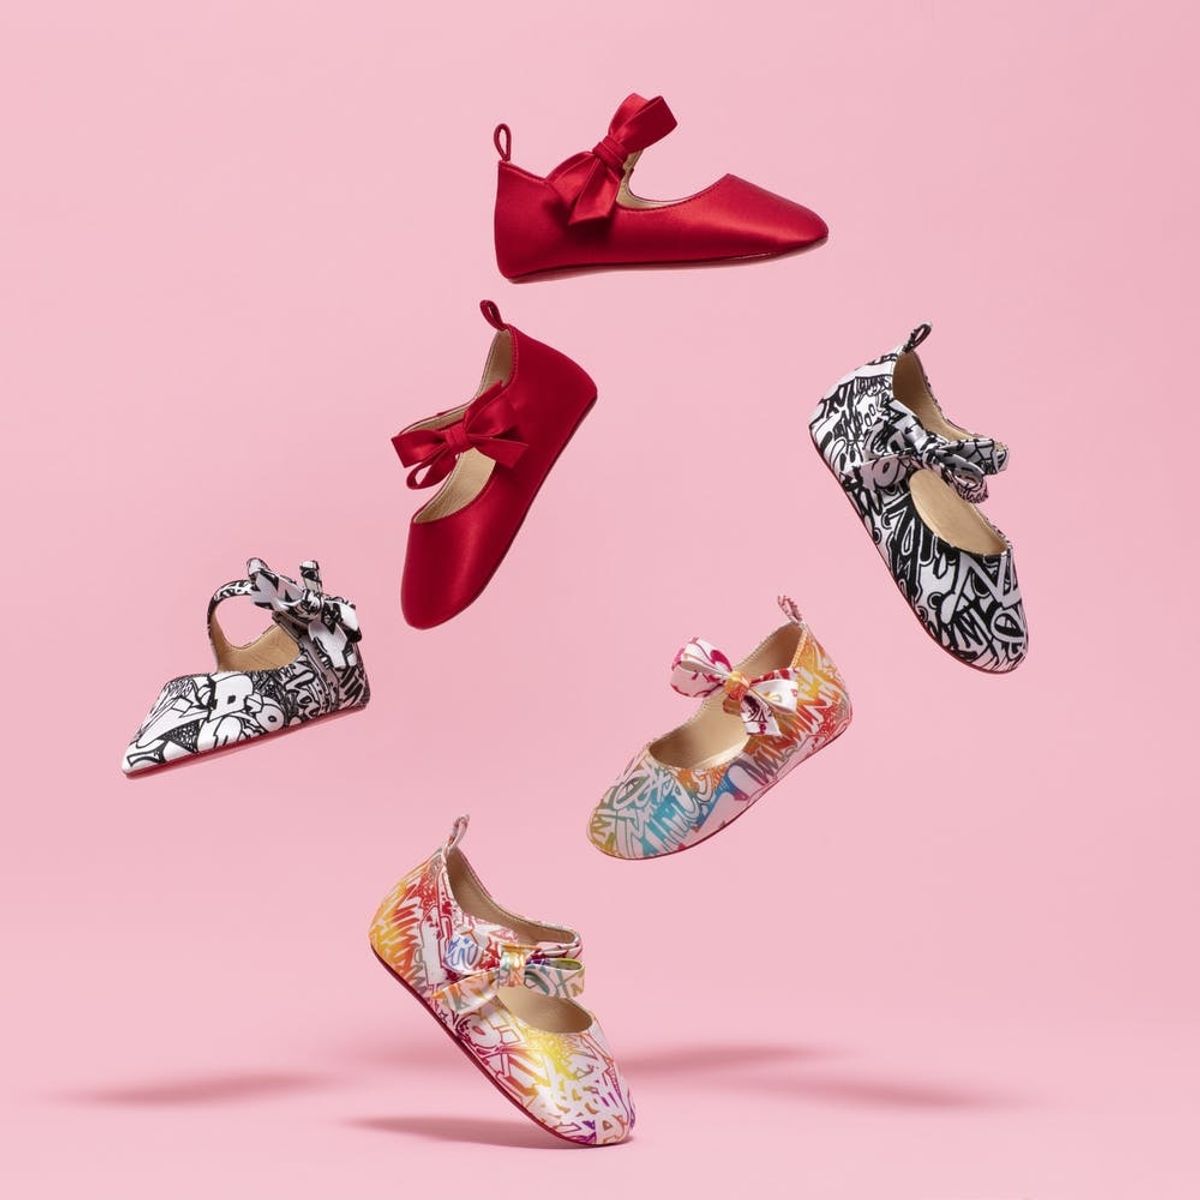 We’re Totally Ga-Ga Over This Christian Louboutin *Baby* Shoe Collection